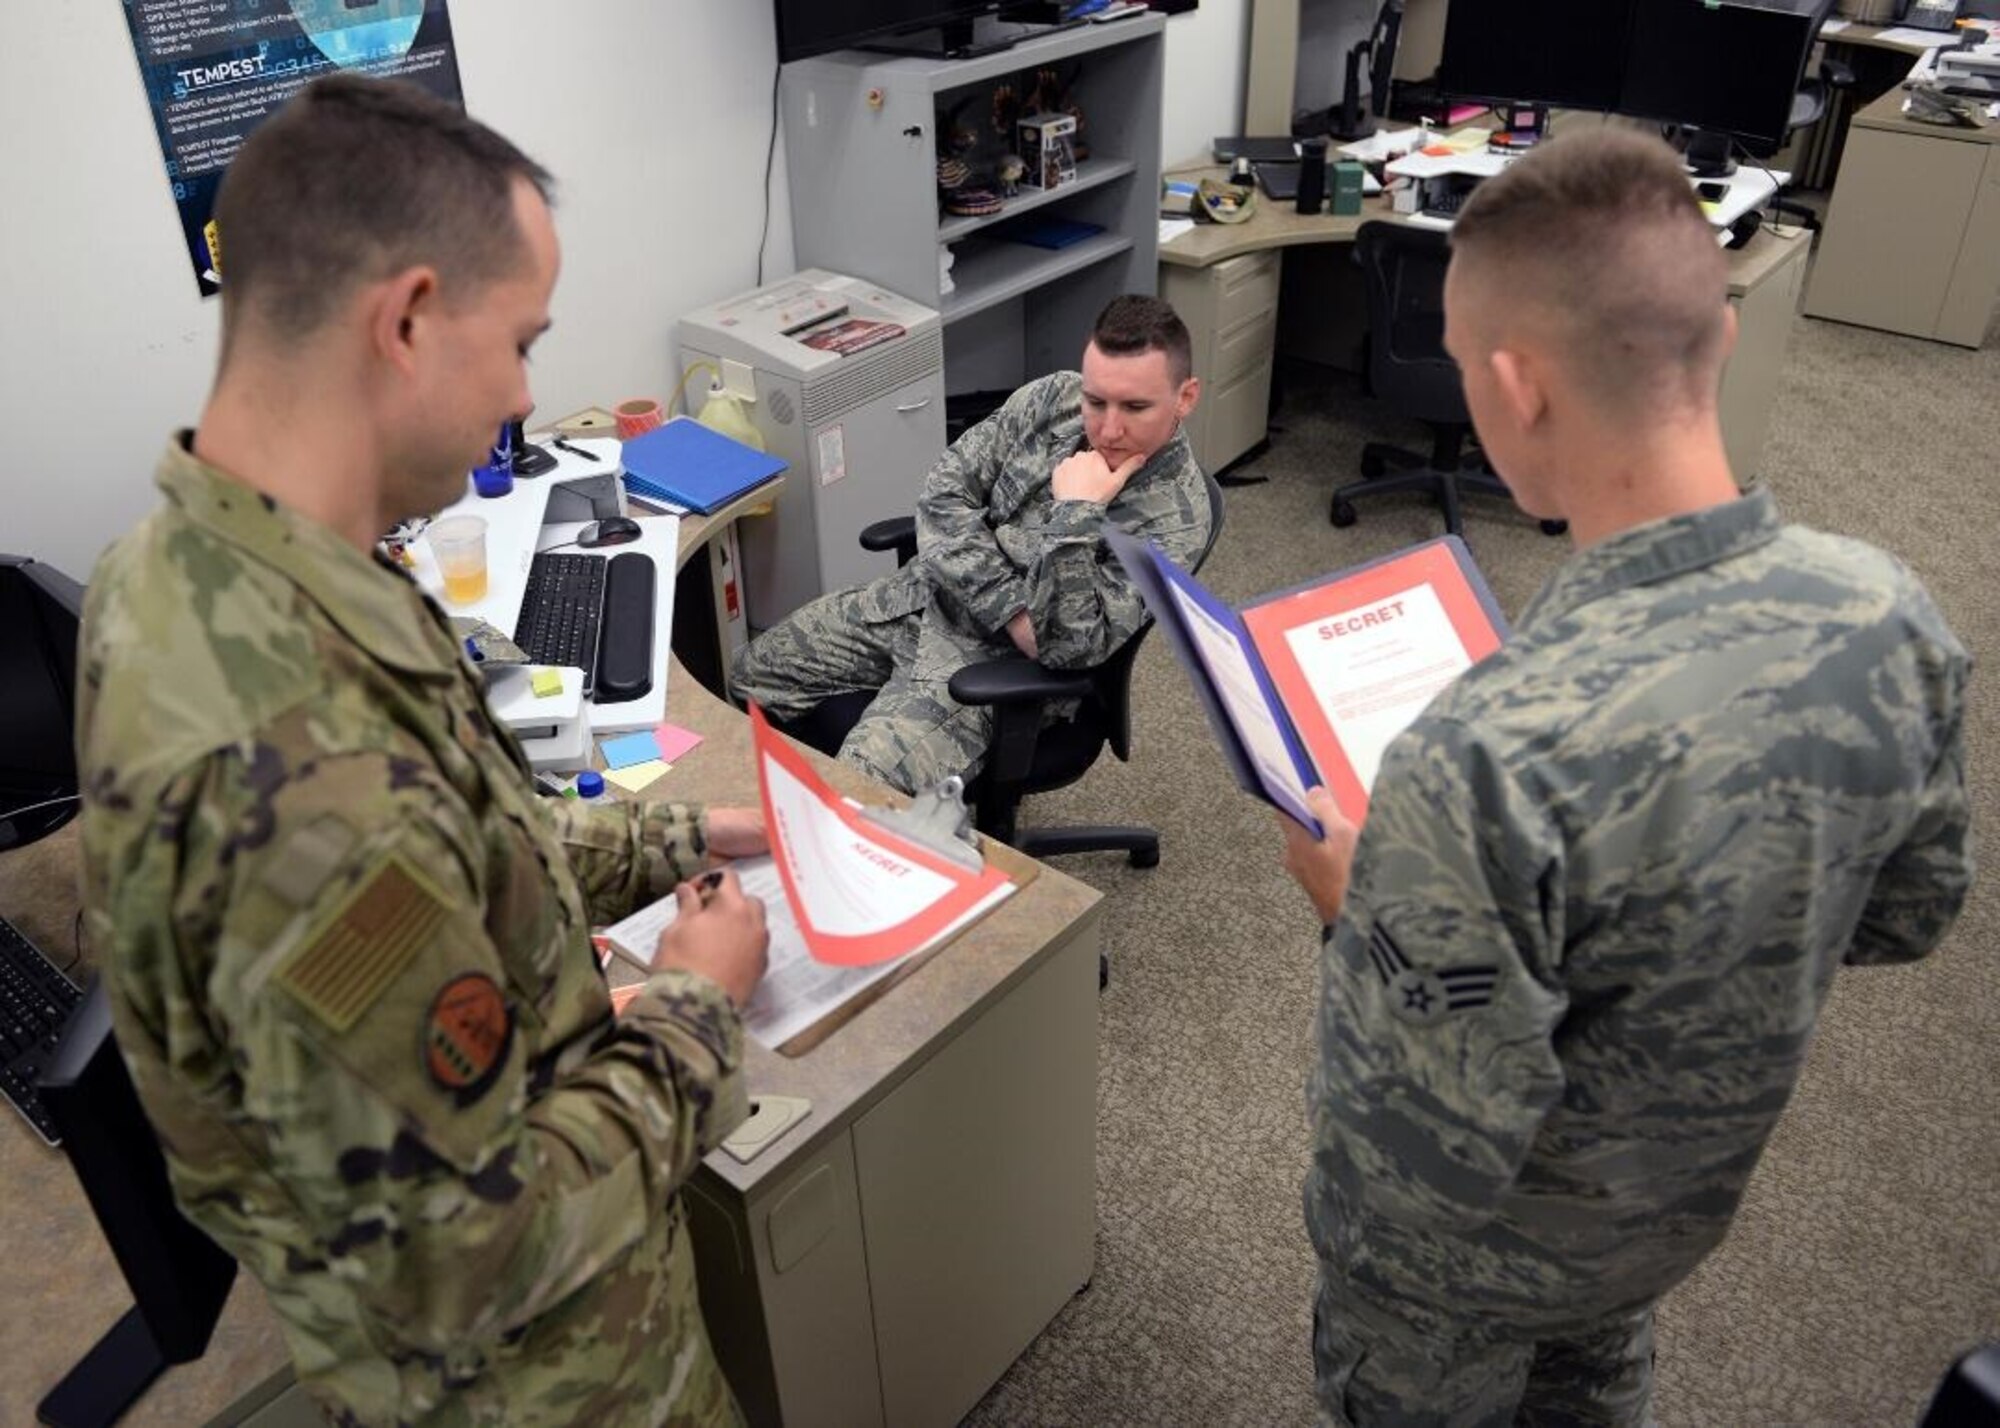 9th Communications Squadron cybersecurity Airmen conduct a simulated inspection in the cybersecurity office, on Beale Air Force Base, Oct. 17, 2019. Performing inspections is a part of how cybersecurity Airmen maintain a safe cyber environment. (U.S. Air Force photo by Airman Jason W. Cochran)